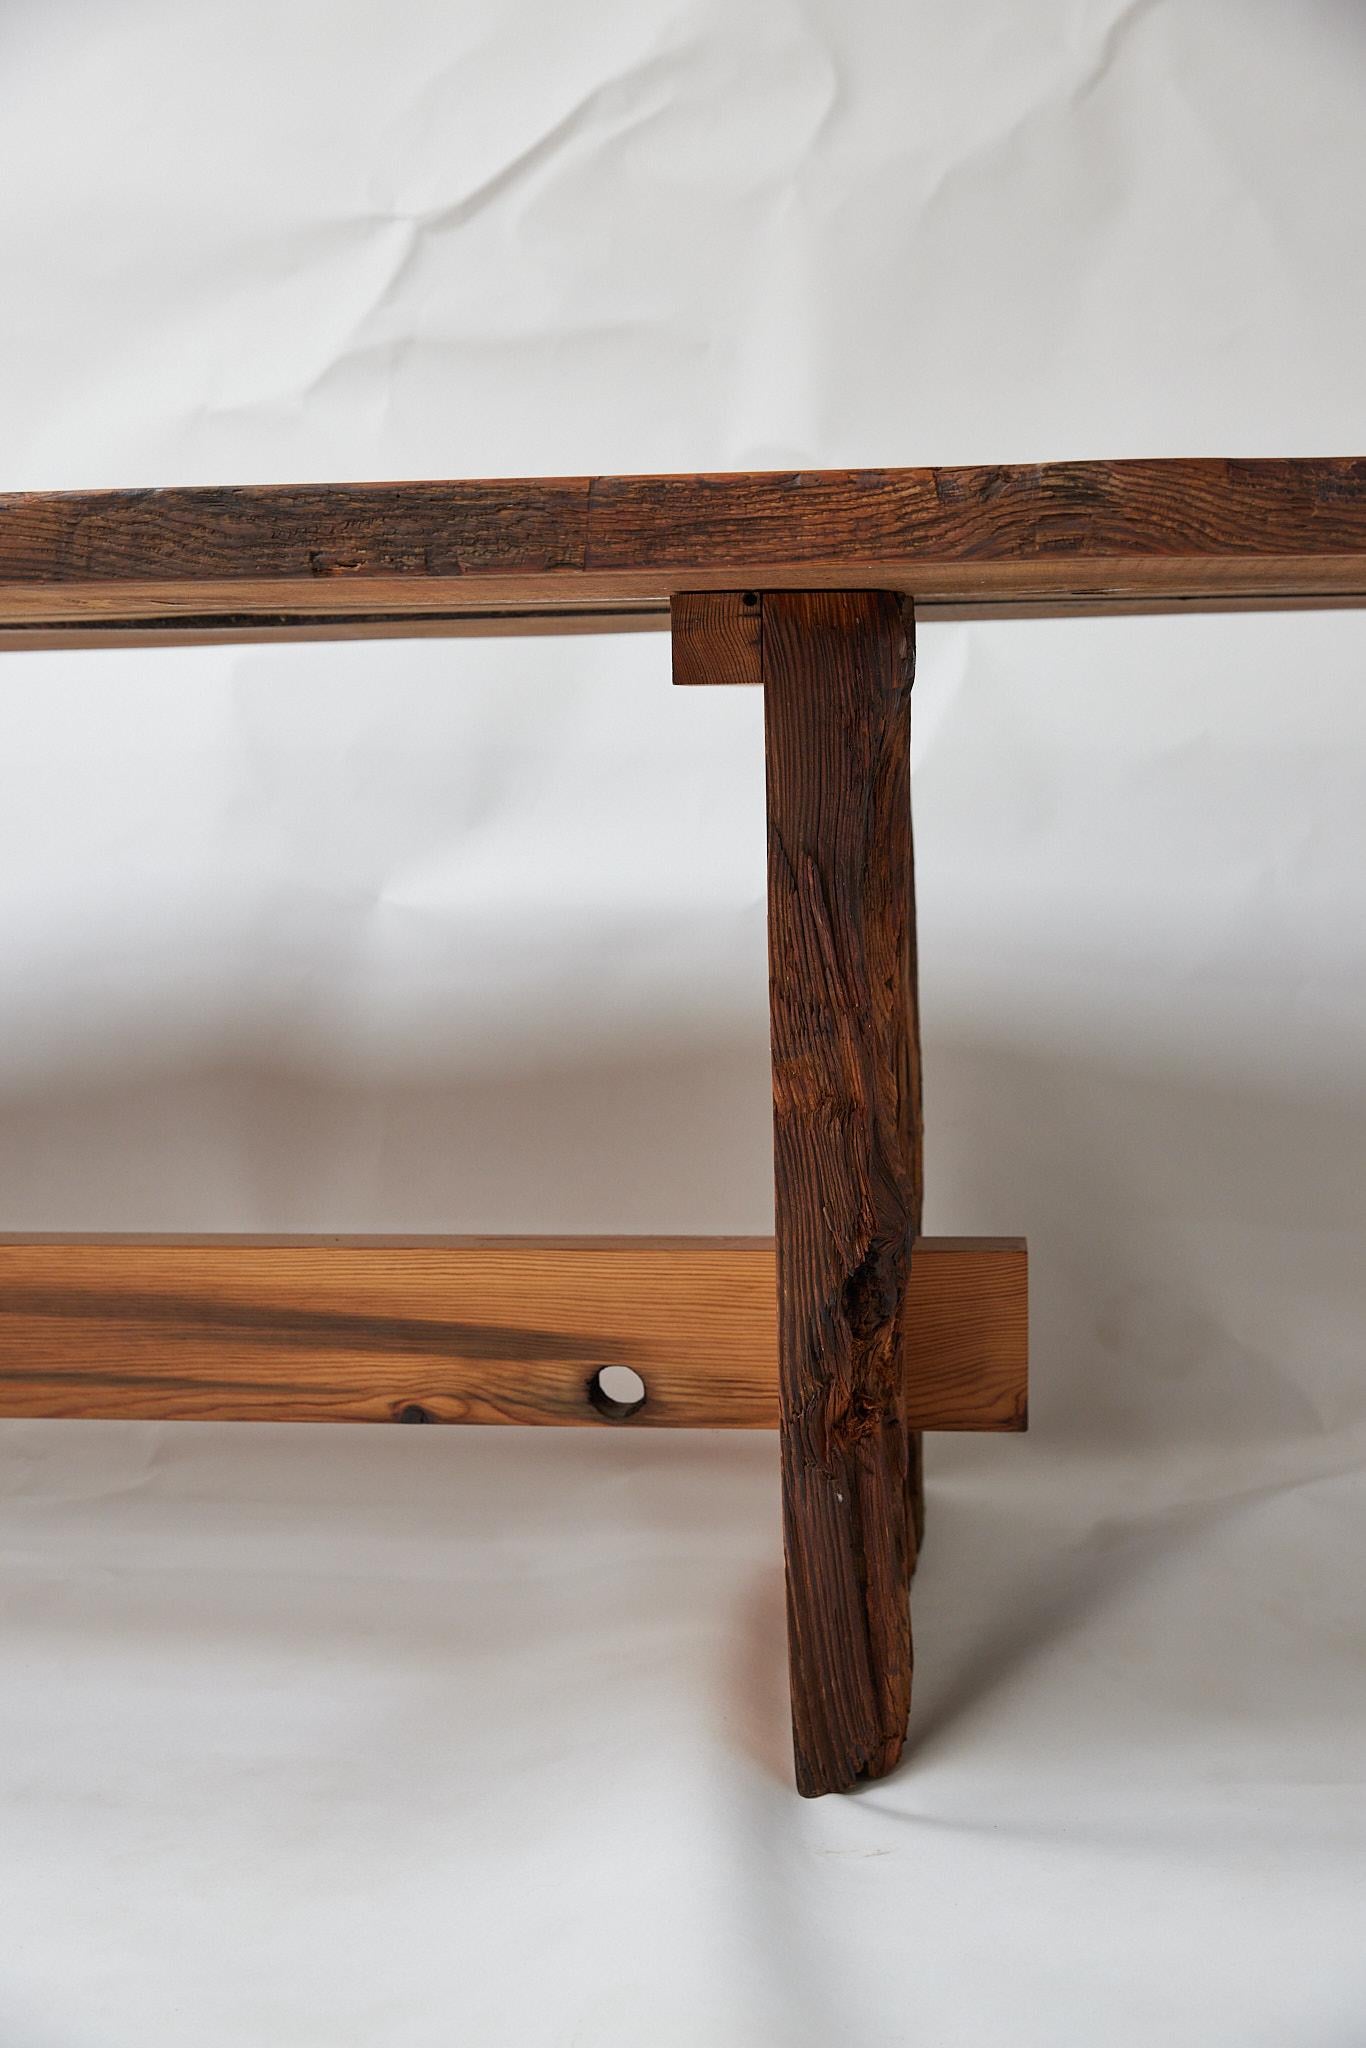 Contemporary Plank Table in historical wood by Danish Fine Cabinetmaker Malte Gormsen  For Sale